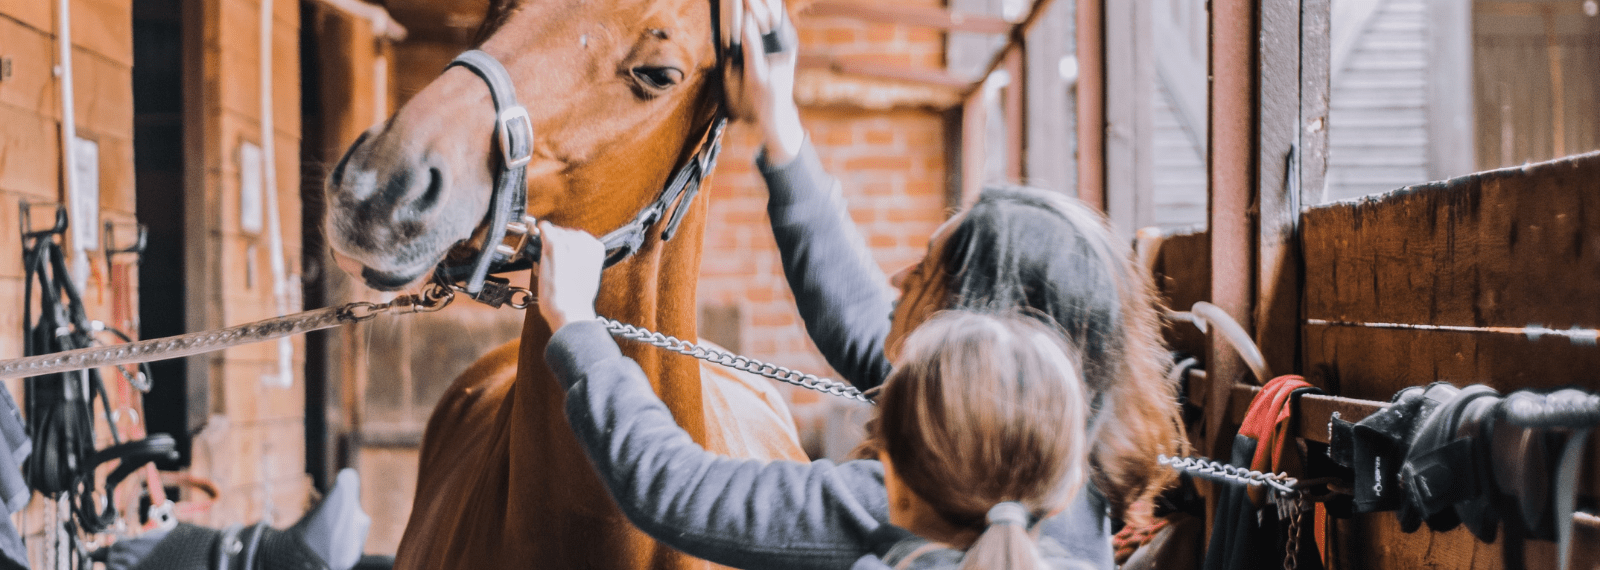 Thinking of Building Stables? Here’s What You Need to Know